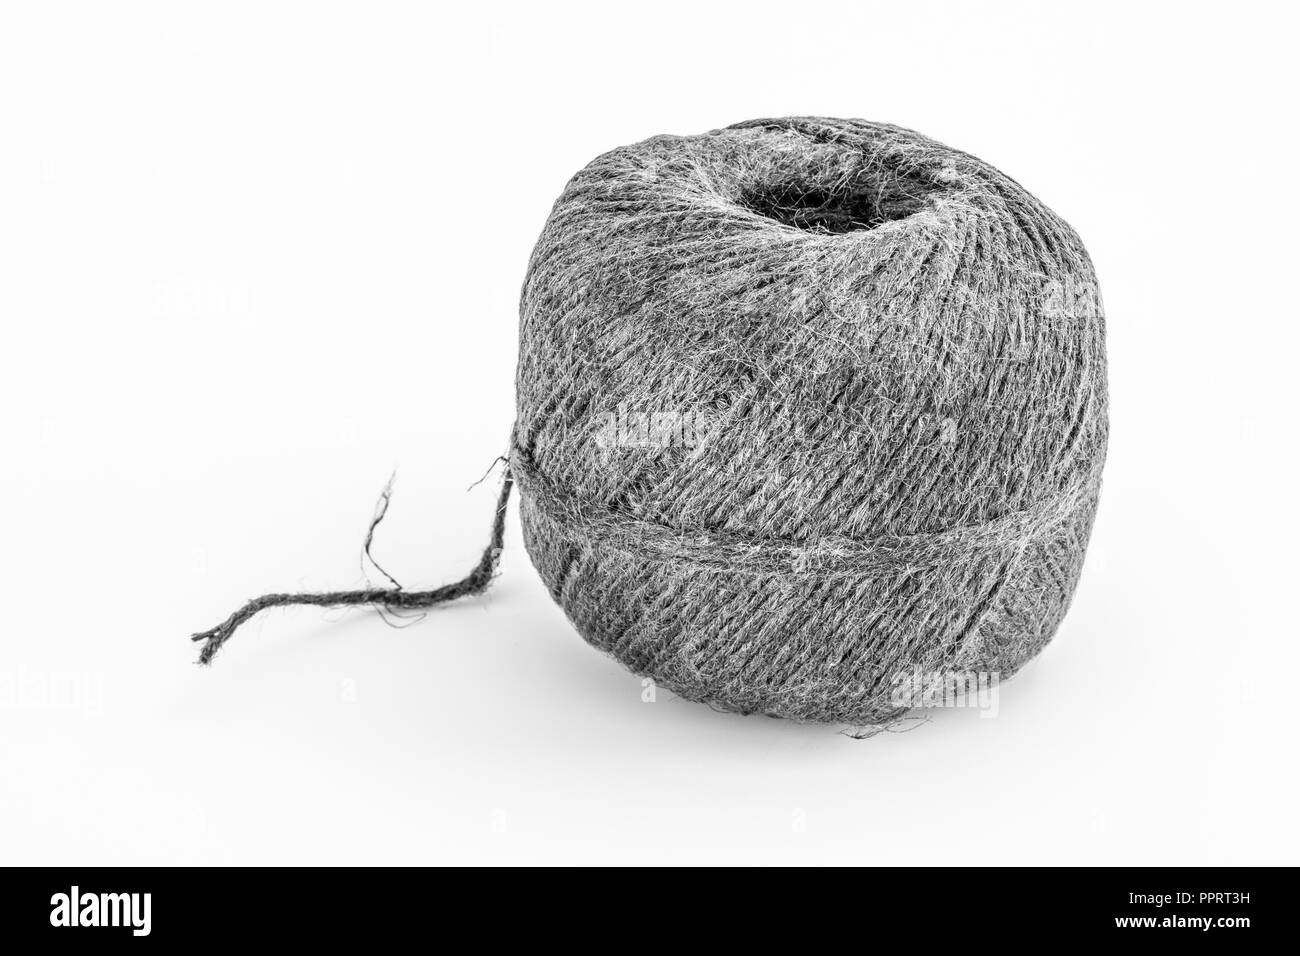 Natural tarred sisal garden twine / string. Grungy B&W conversion of PPRT3B. Metaphor 'How long is a piece of string.' Stock Photo